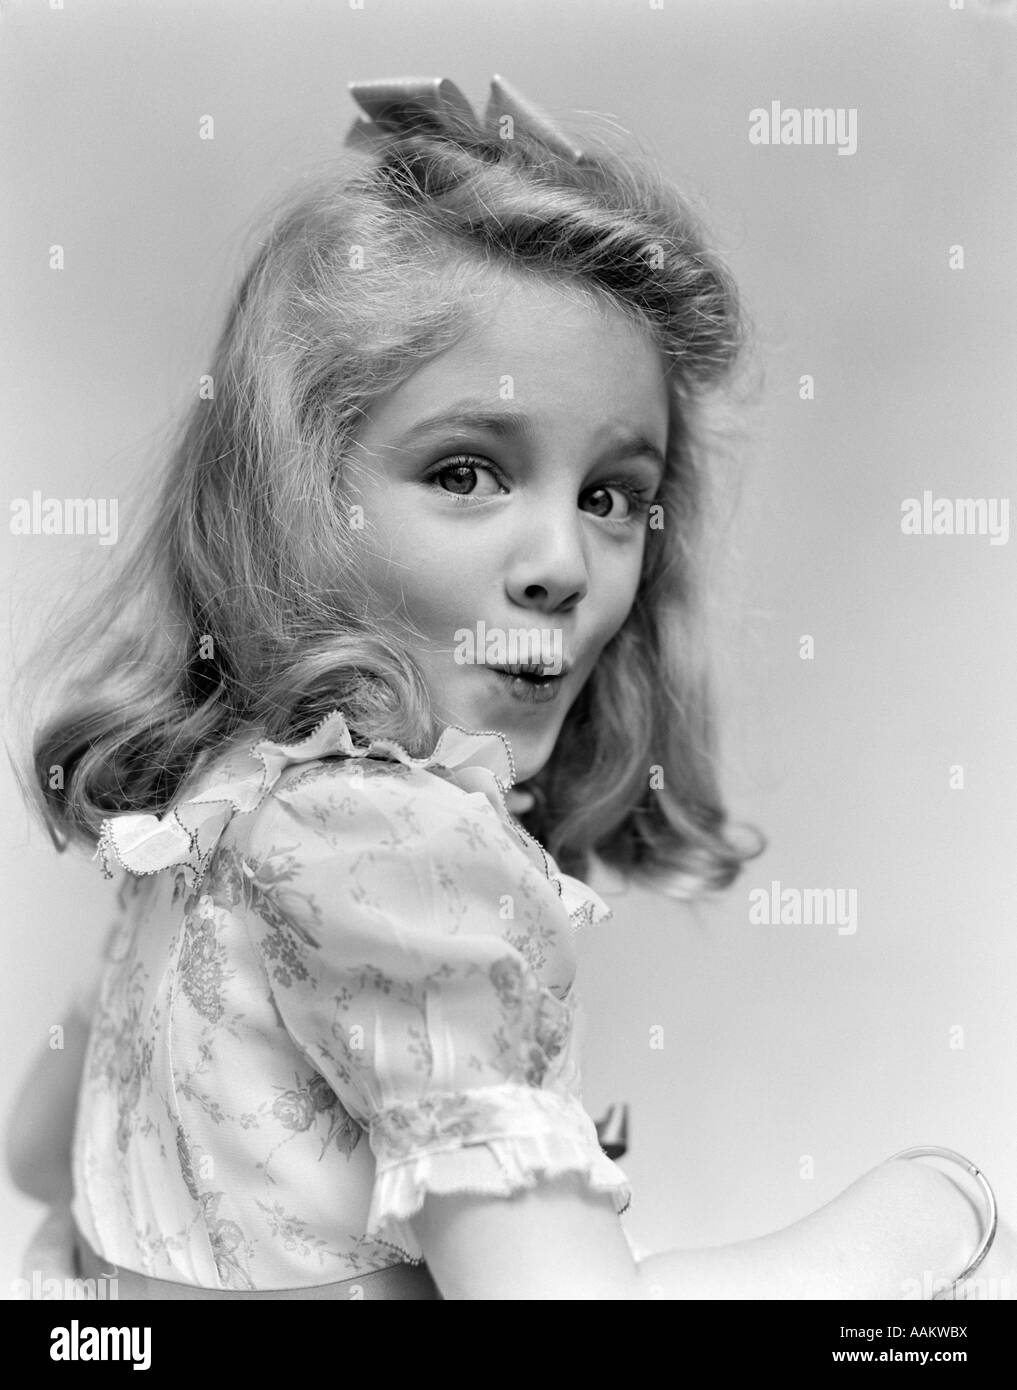 1940s PORTRAIT YOUNG GIRL TURNED TO ONE SIDE LOOKING AT CAMERA WITH FUNNY FACIAL EXPRESSION Stock Photo